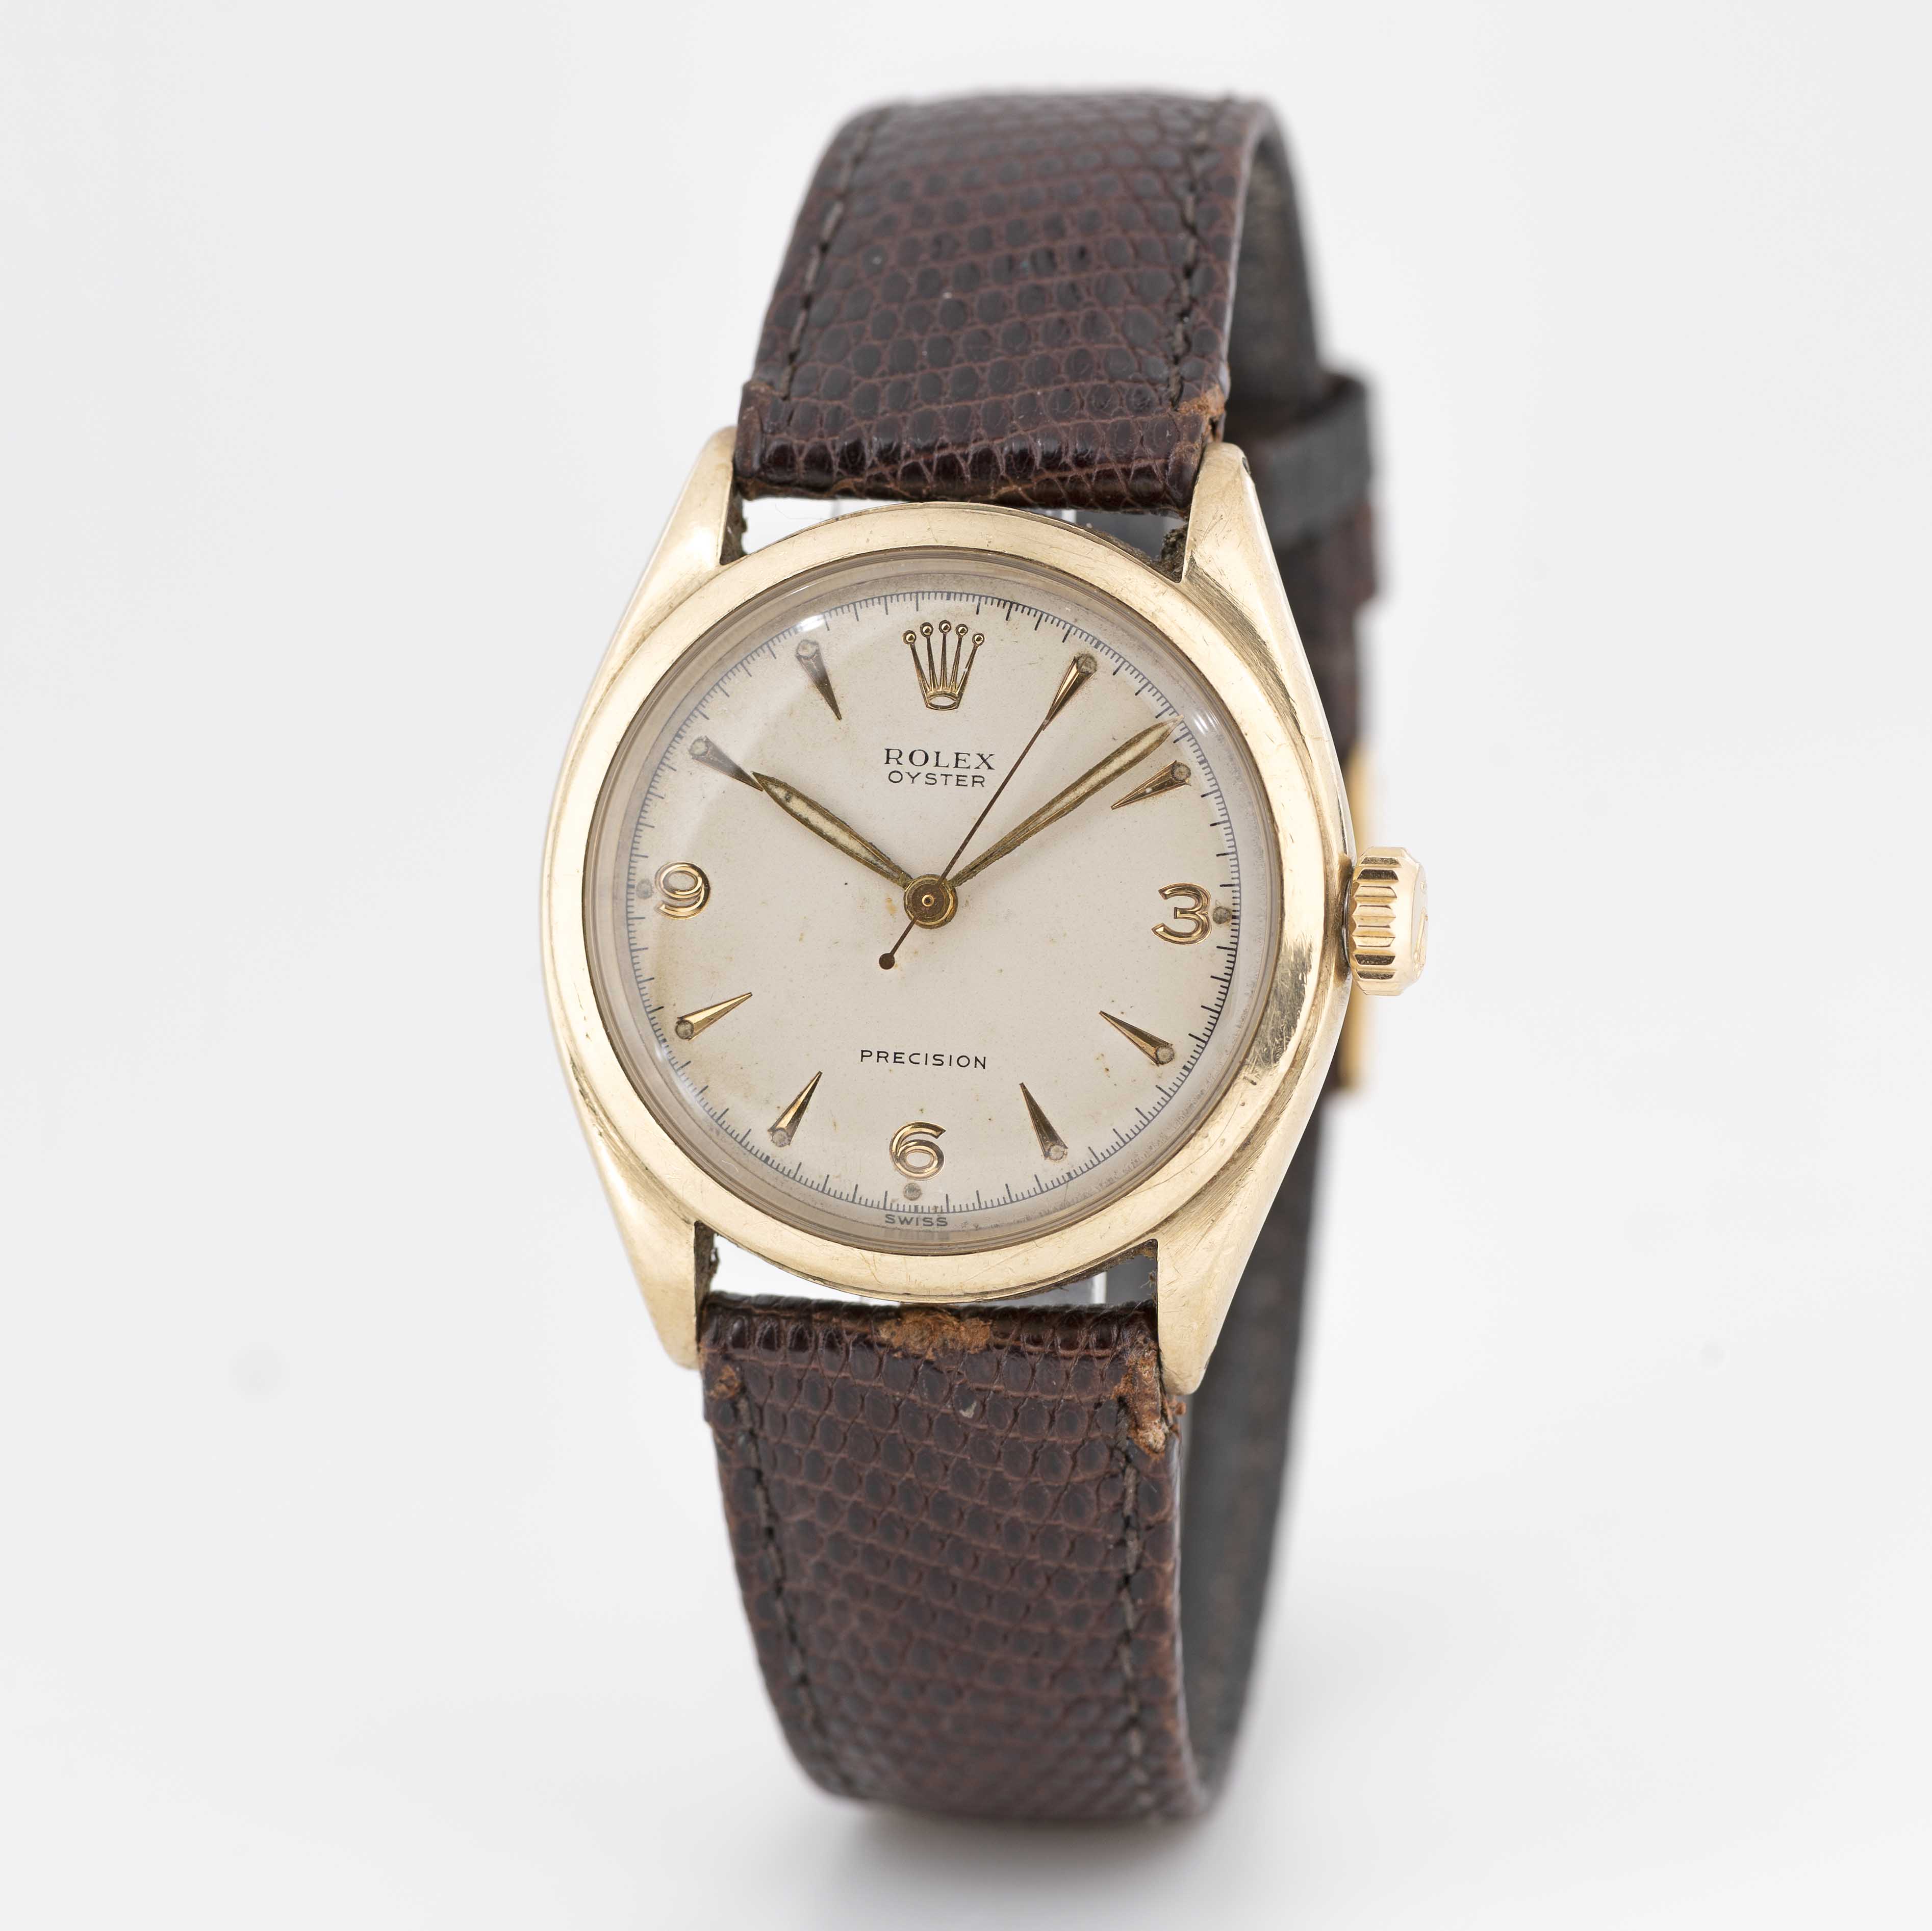 A RARE GENTLEMAN'S 10K SOLID GOLD ROLEX OYSTER PRECISION WRIST WATCH CIRCA 1952, REF. 6022 WITH 3- - Image 4 of 9